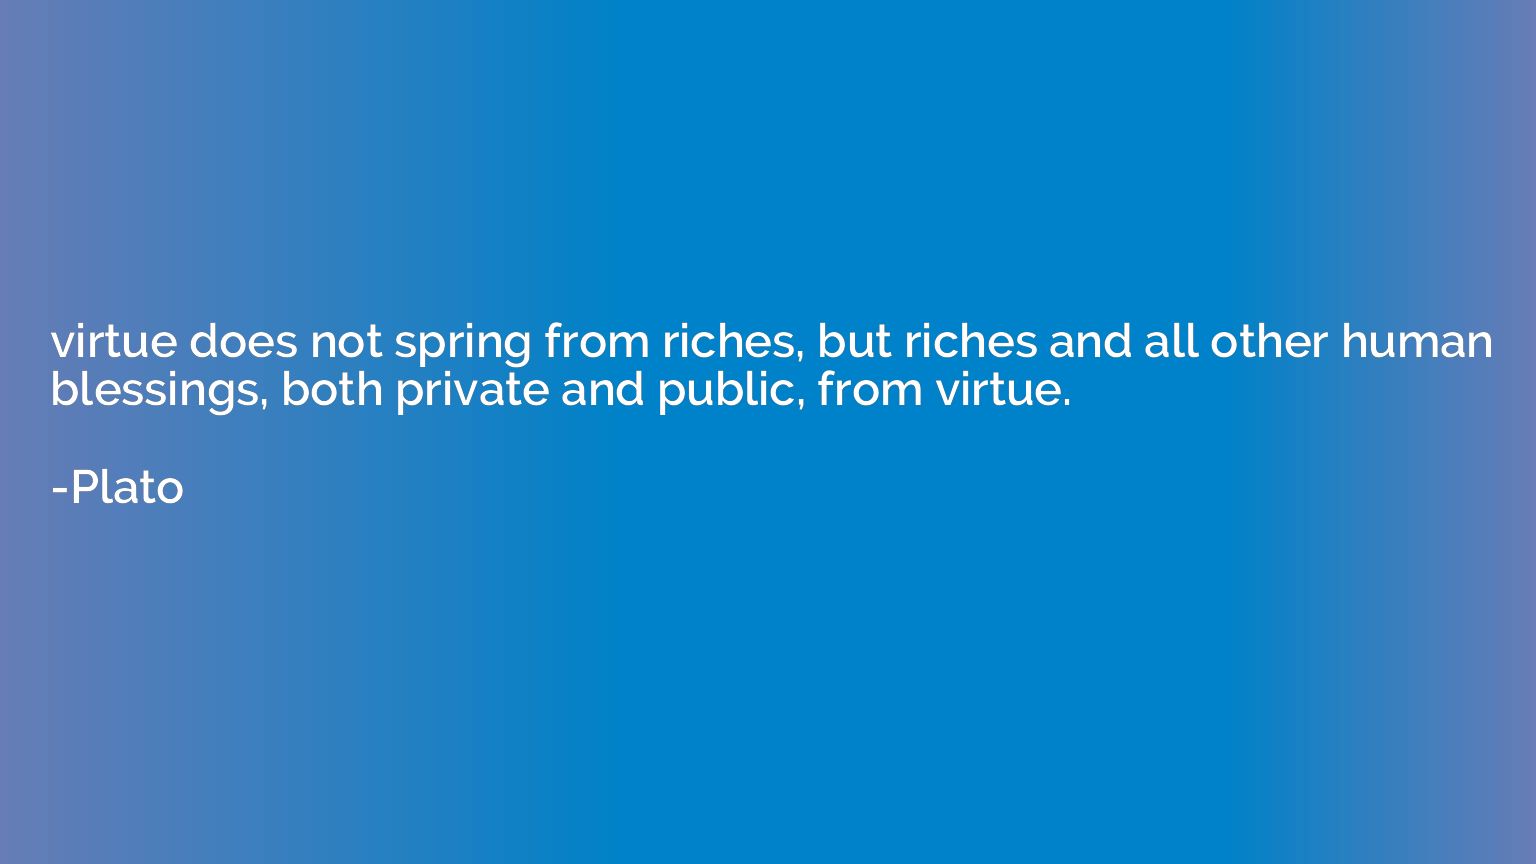 virtue does not spring from riches, but riches and all other